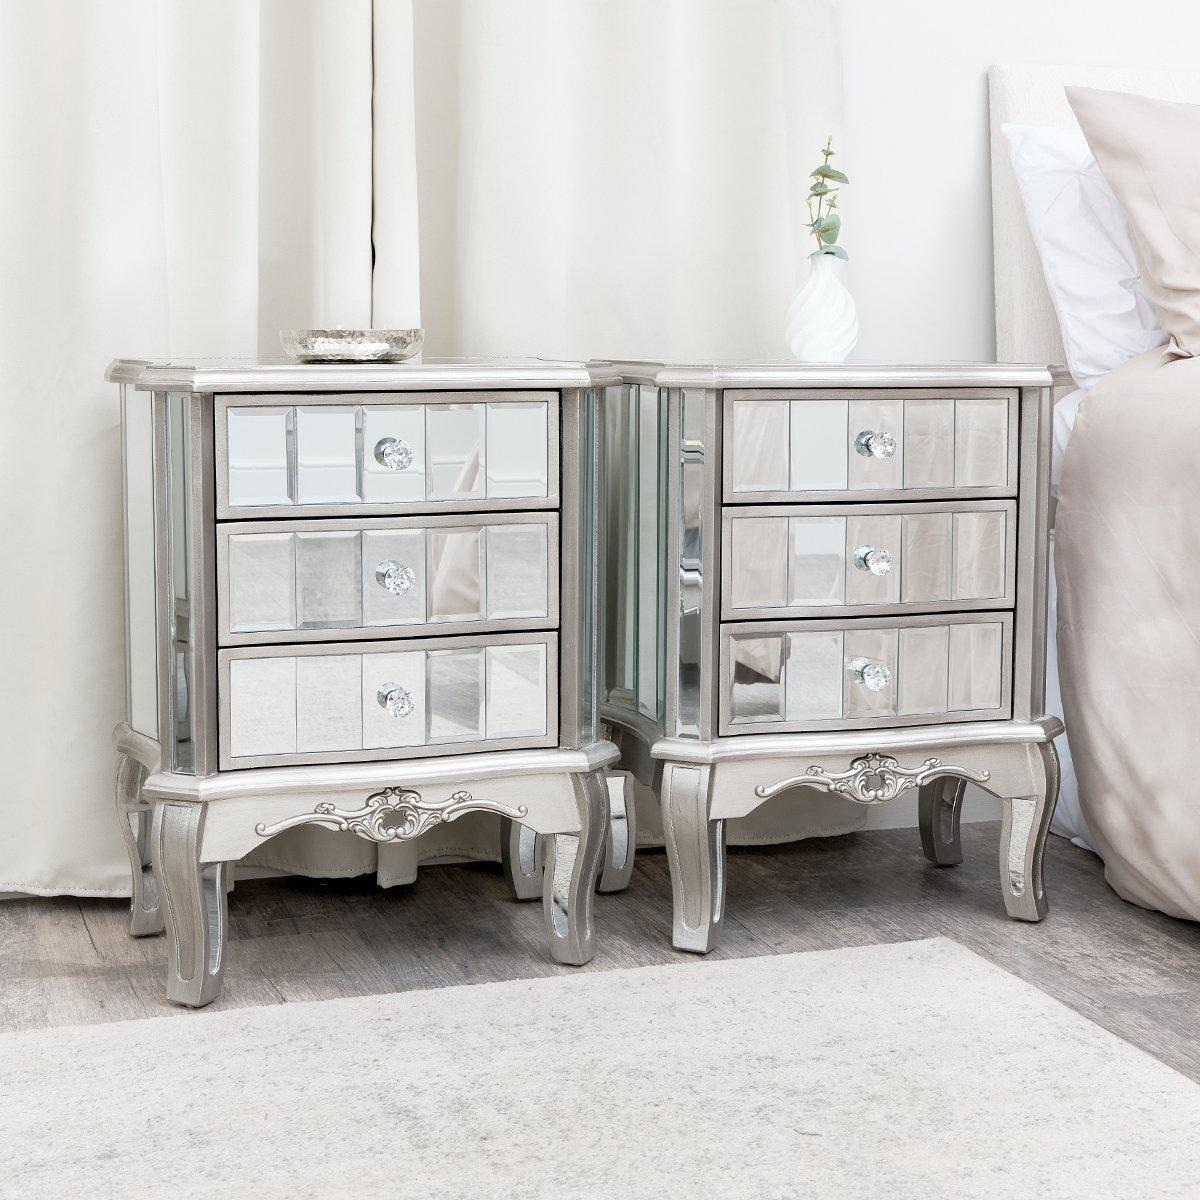 Pair Of Mirrored Bedside Tables - Tiffany Range - image 1